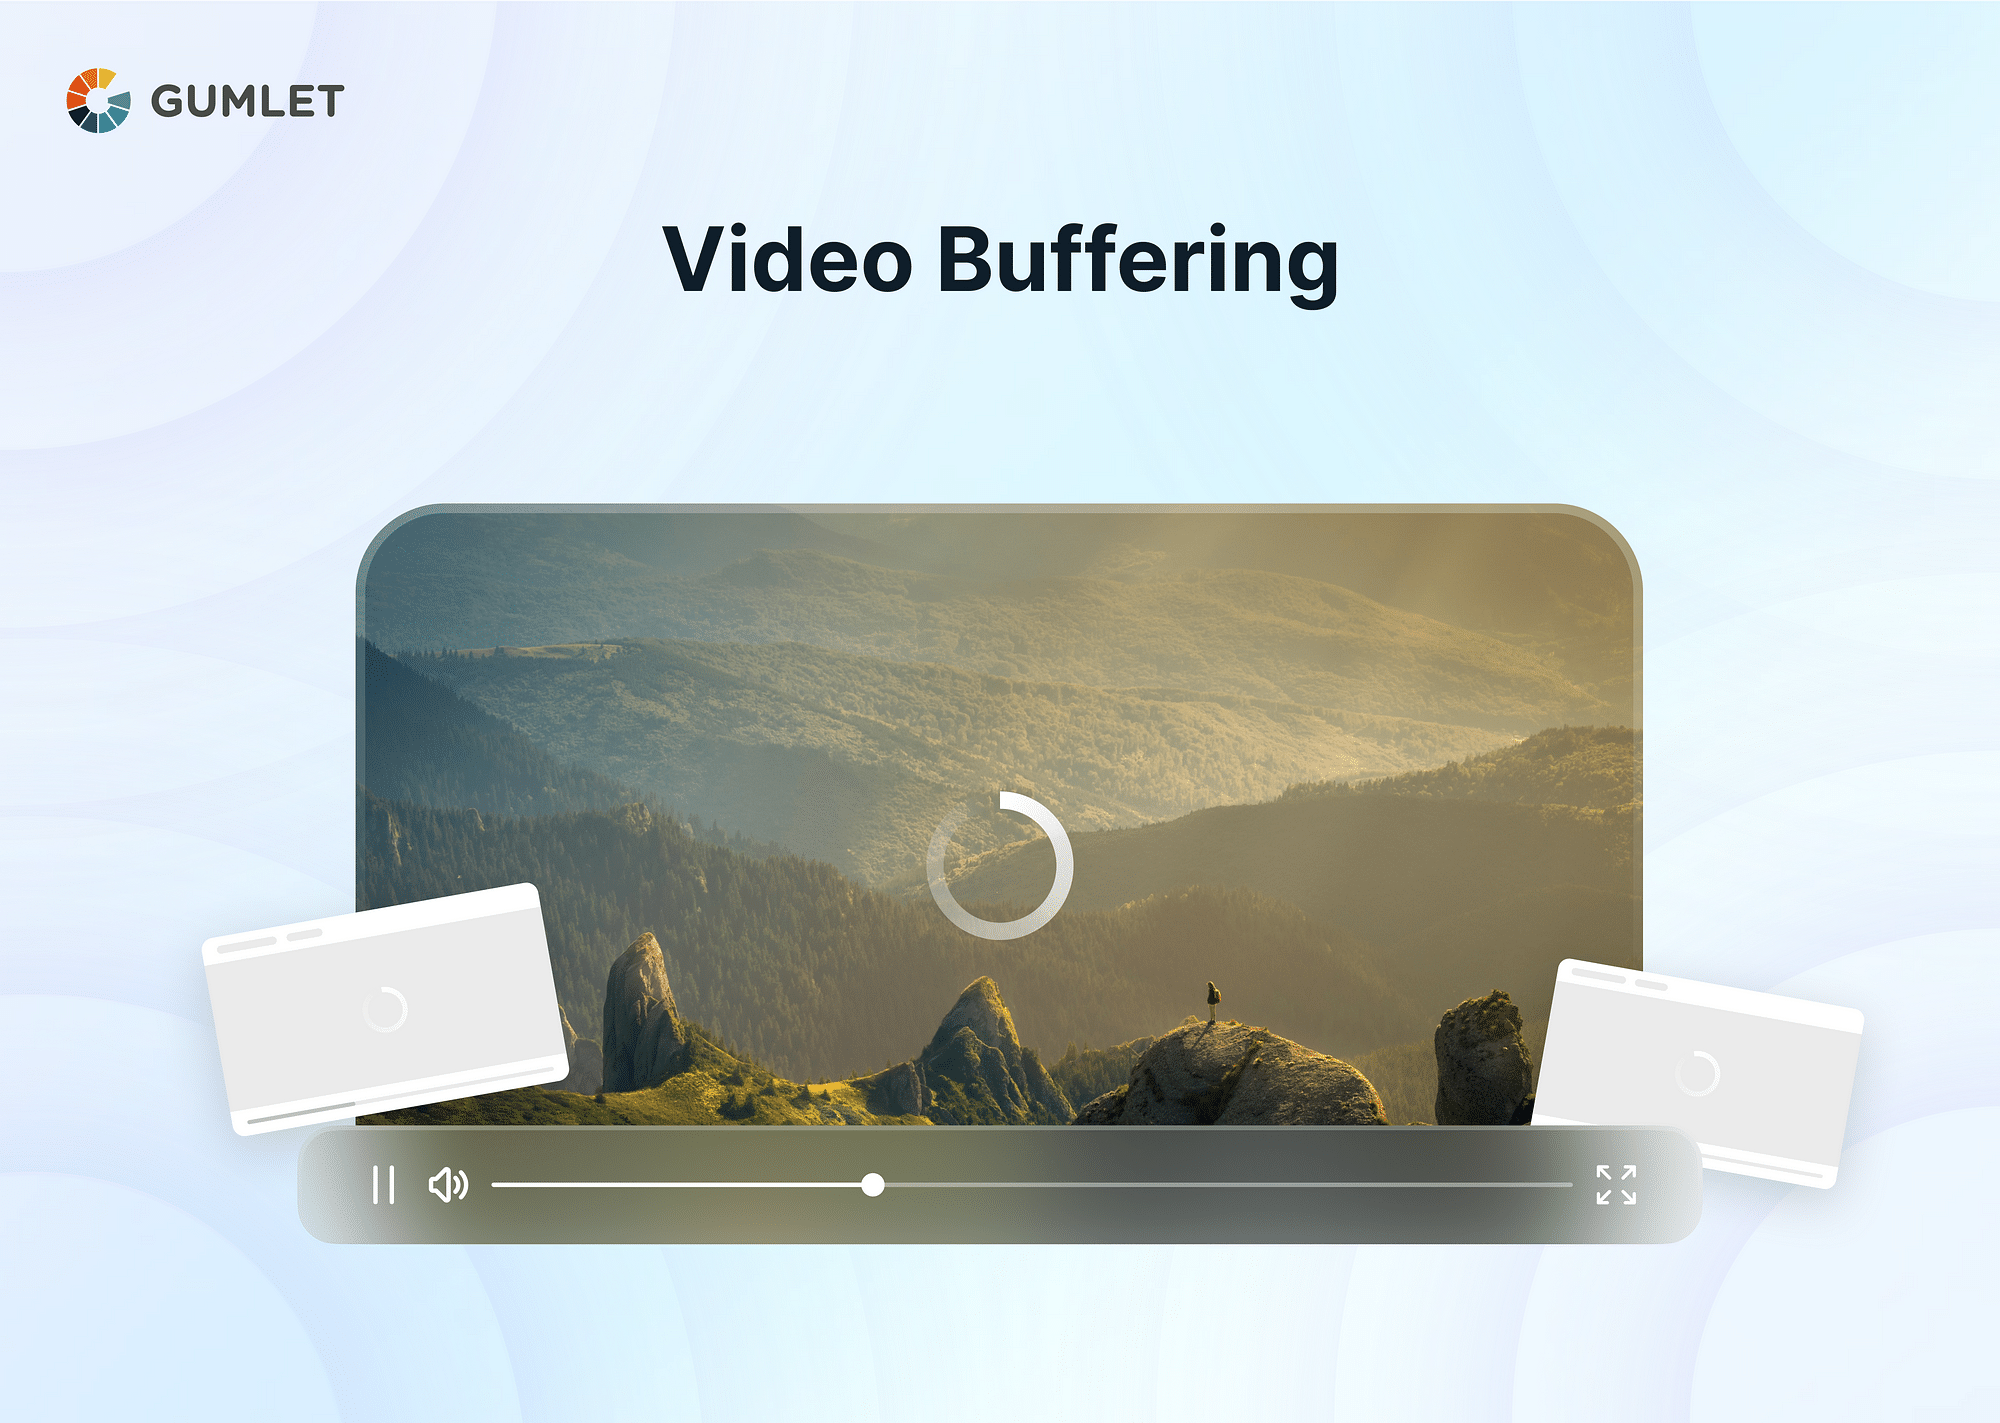 How to Stop Video Buffering?